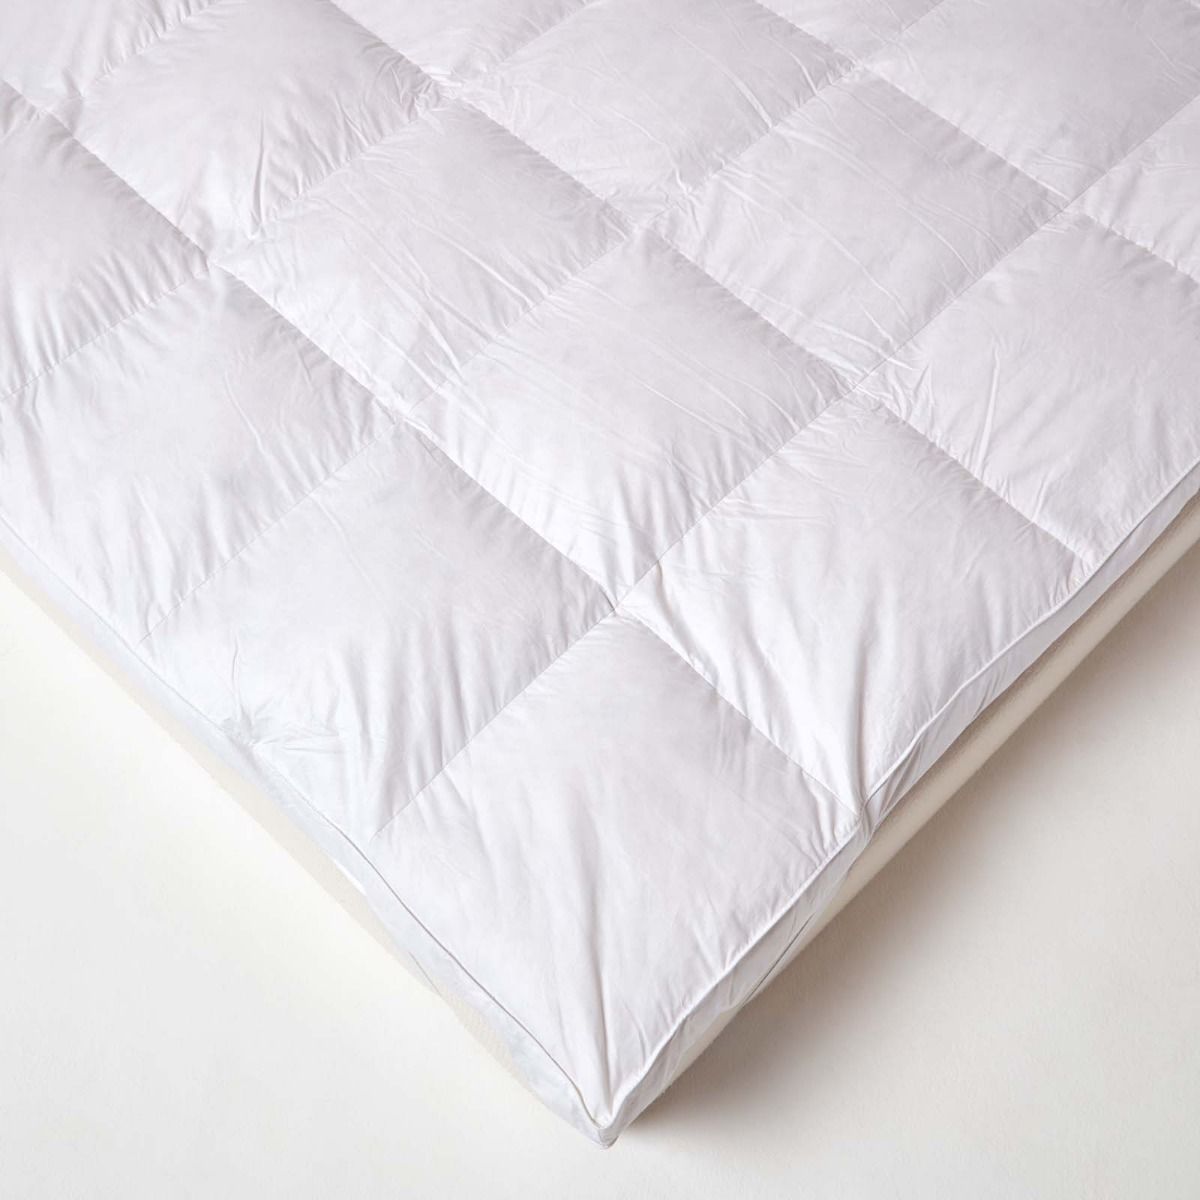 Details about   Super Soft Duck Feather 7cm Thick Mattress Topper Extra Deep All Sizes Available 